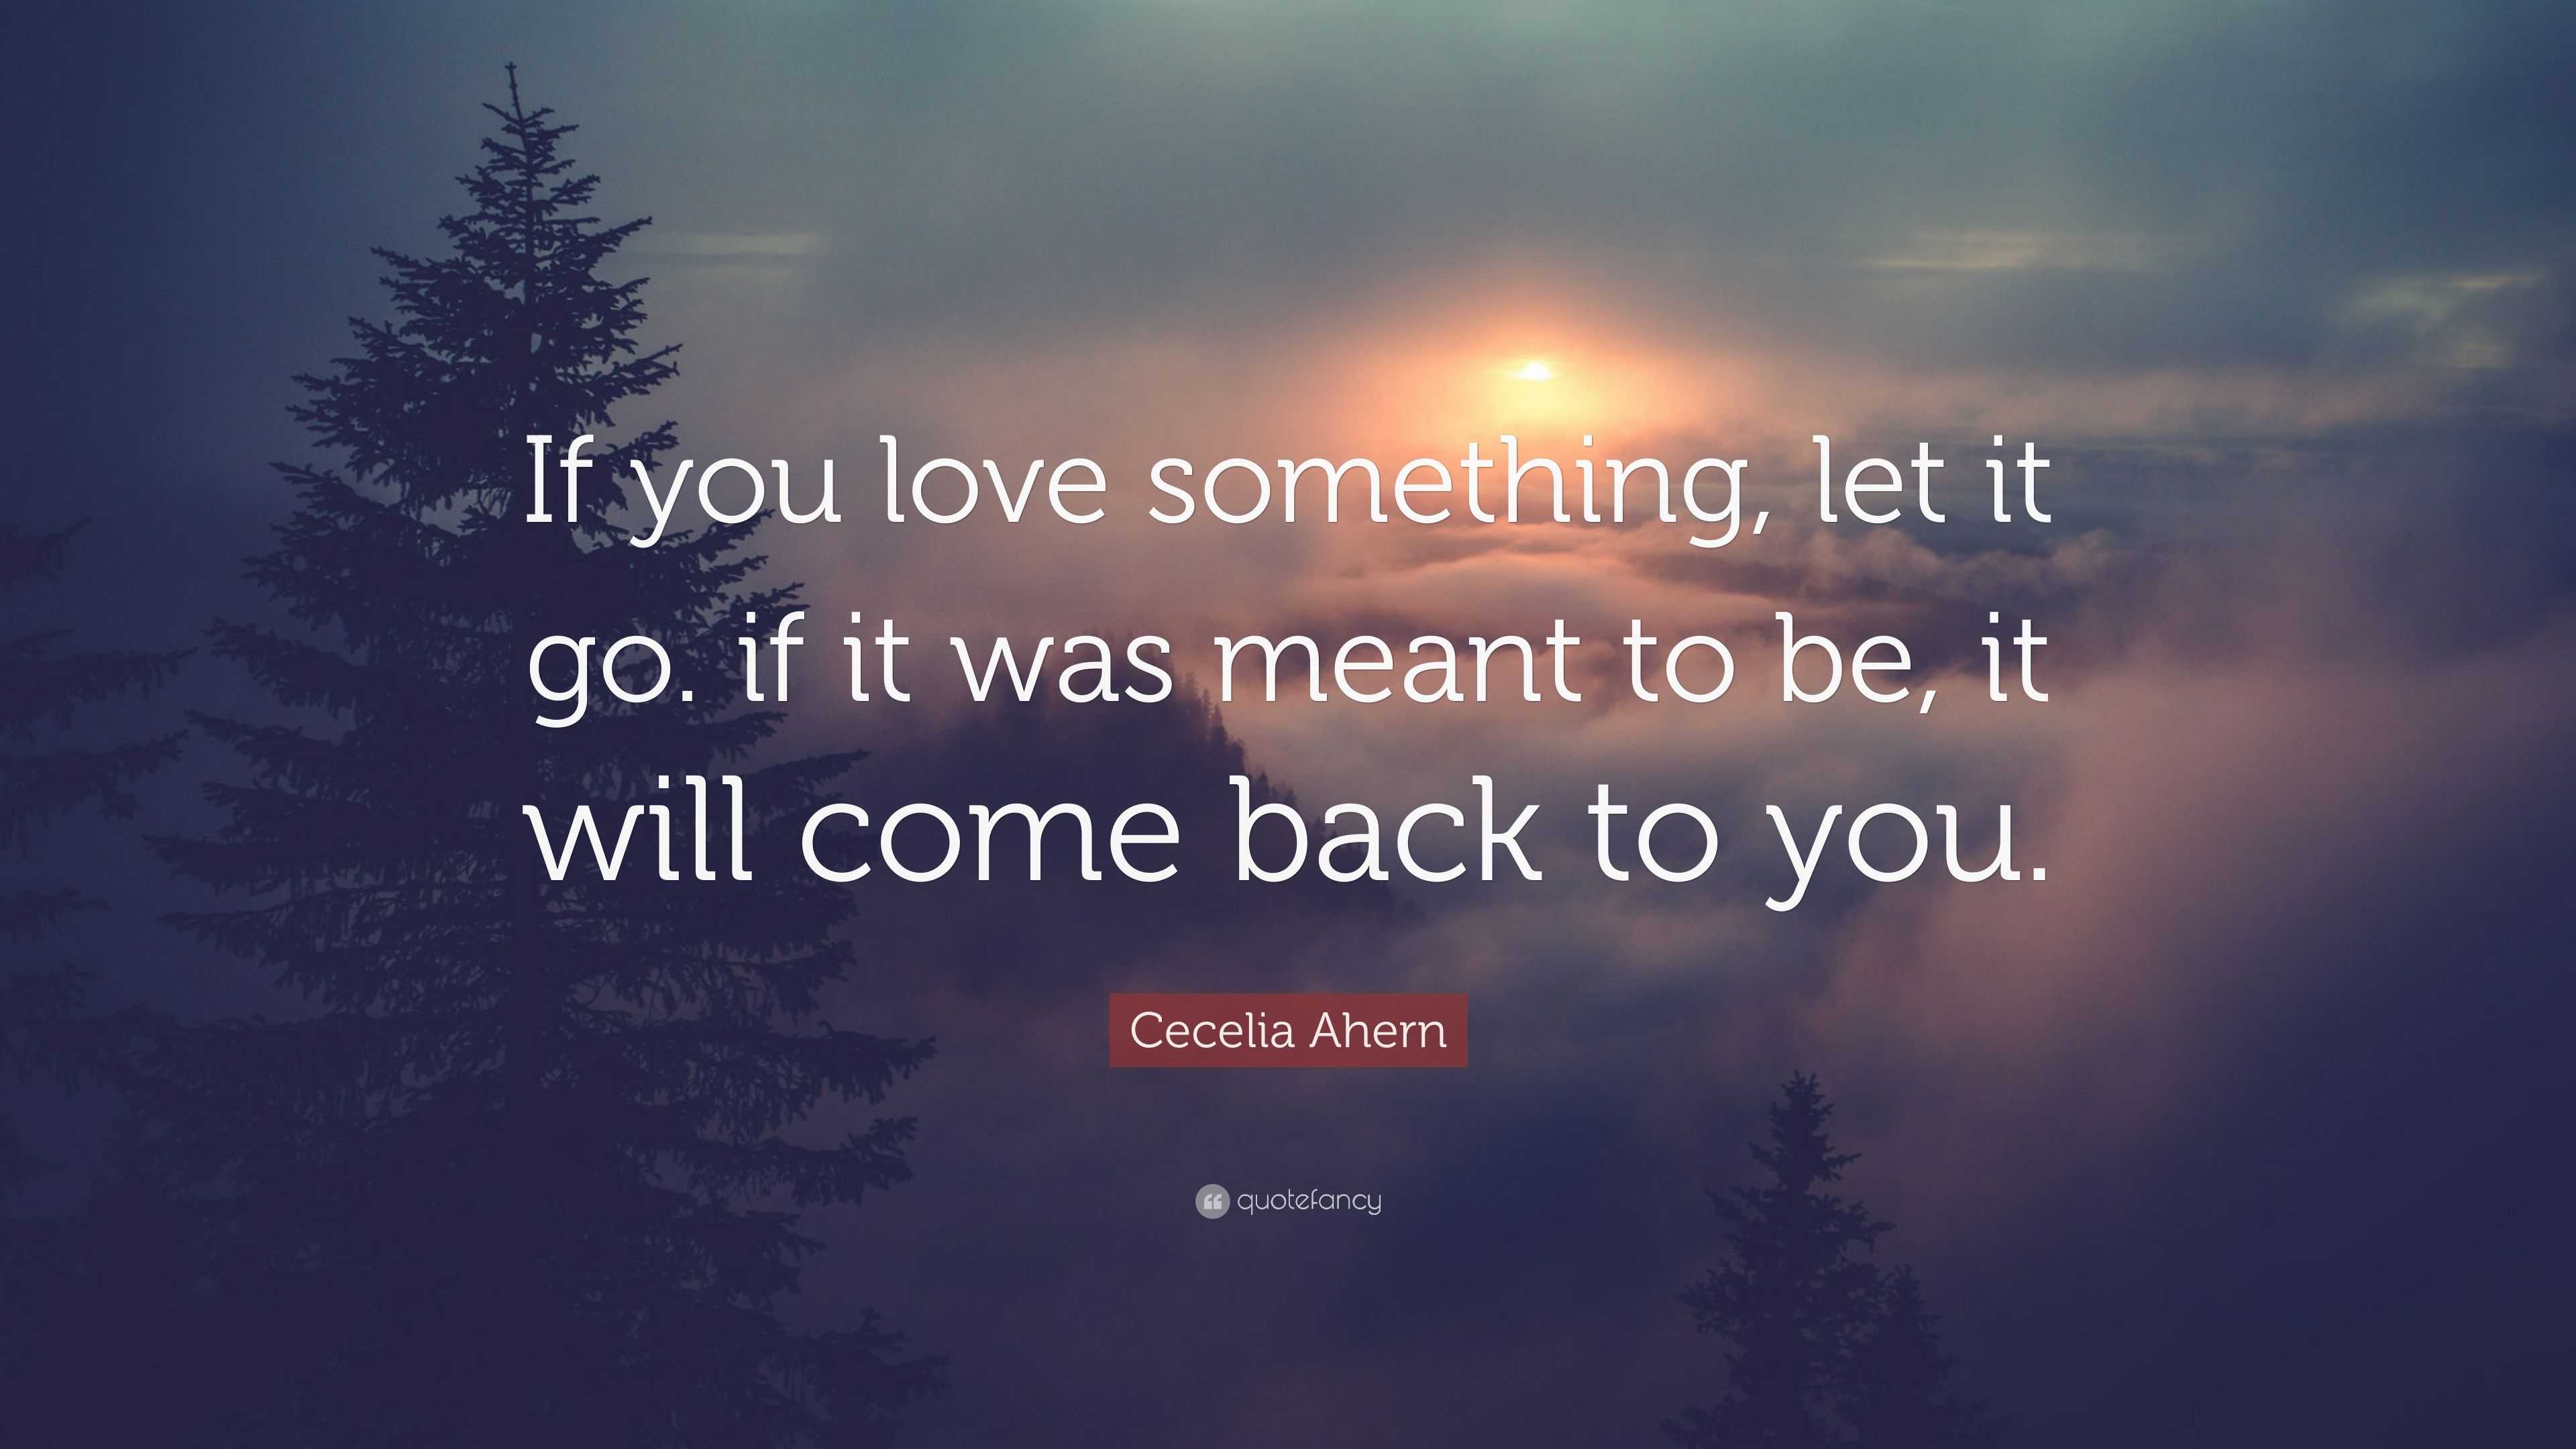 Cecelia Ahern Quote: "If you love something, let it go. if it was meant to be, it will come back ...